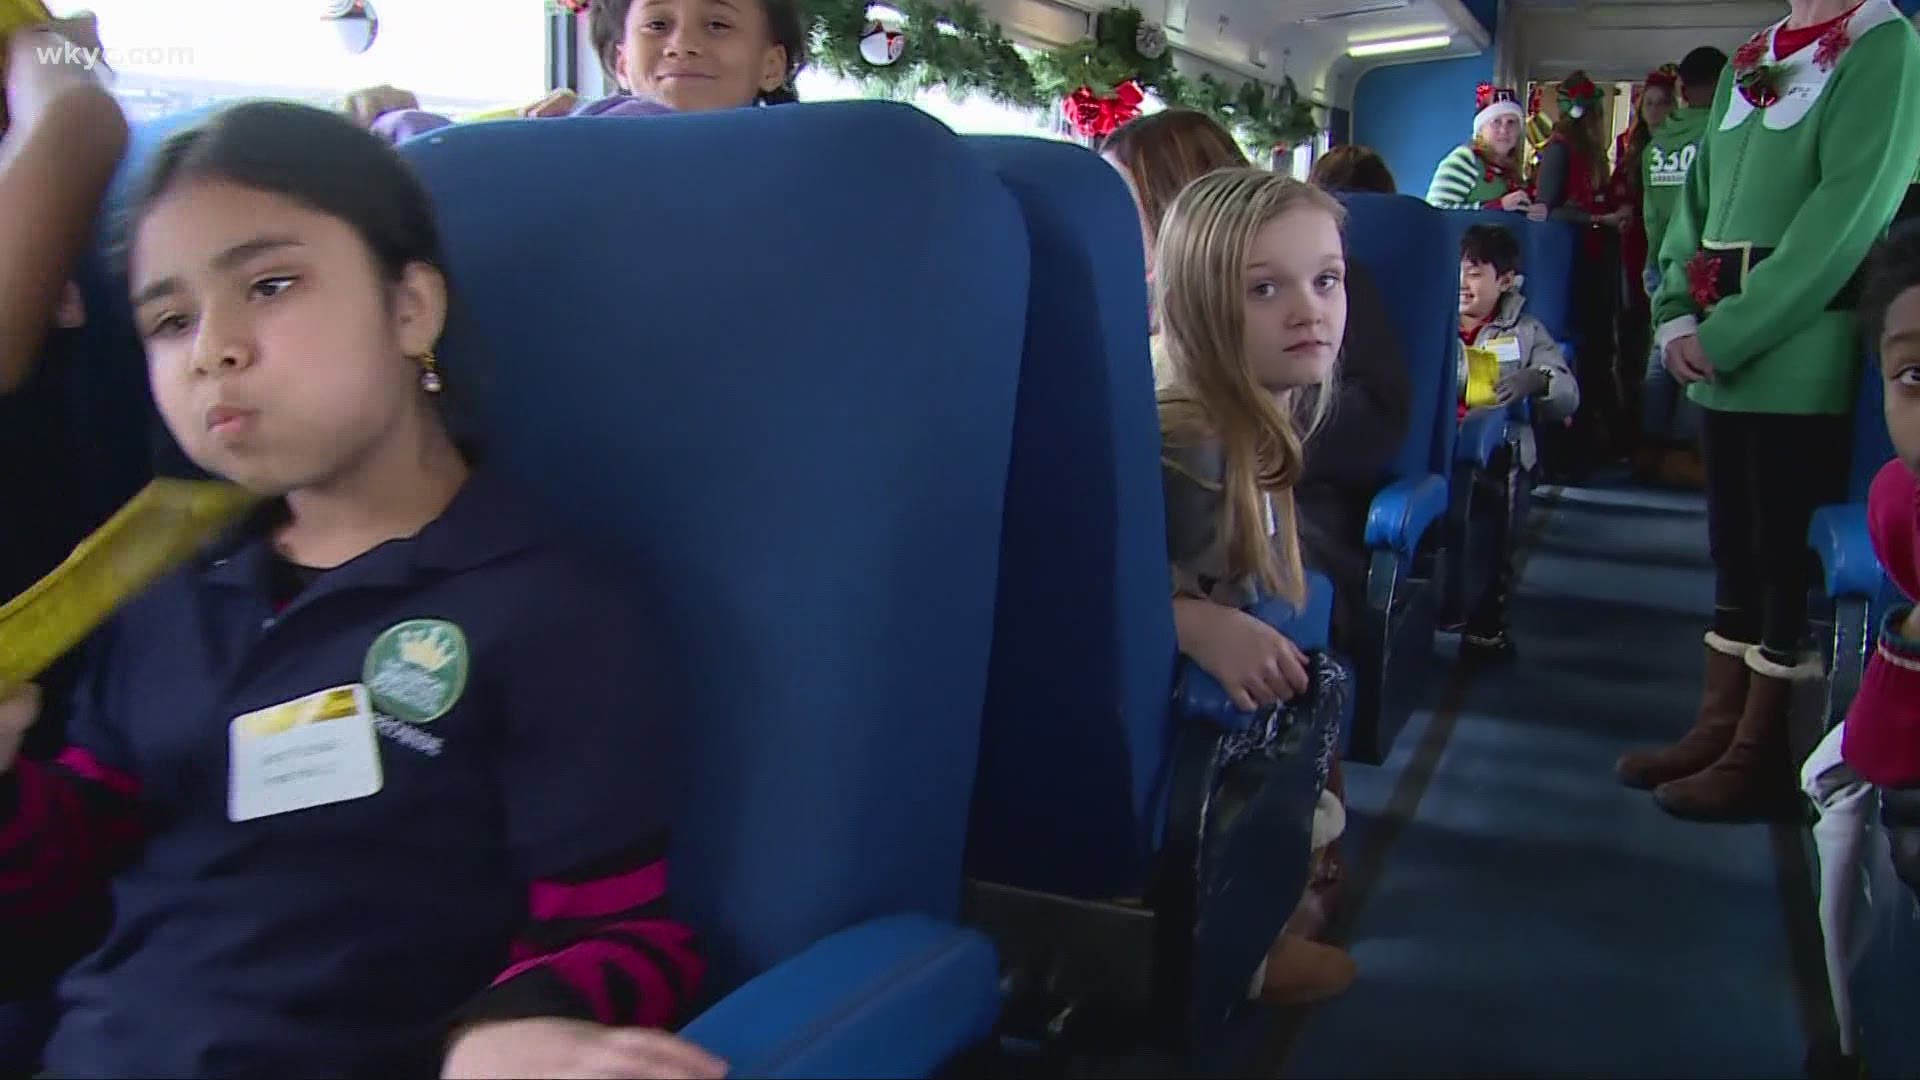 Cuyahoga Valley Scenic Railroad made the difficult decision to end the Polar Express after a rise in cases. Romney Smith has the details.